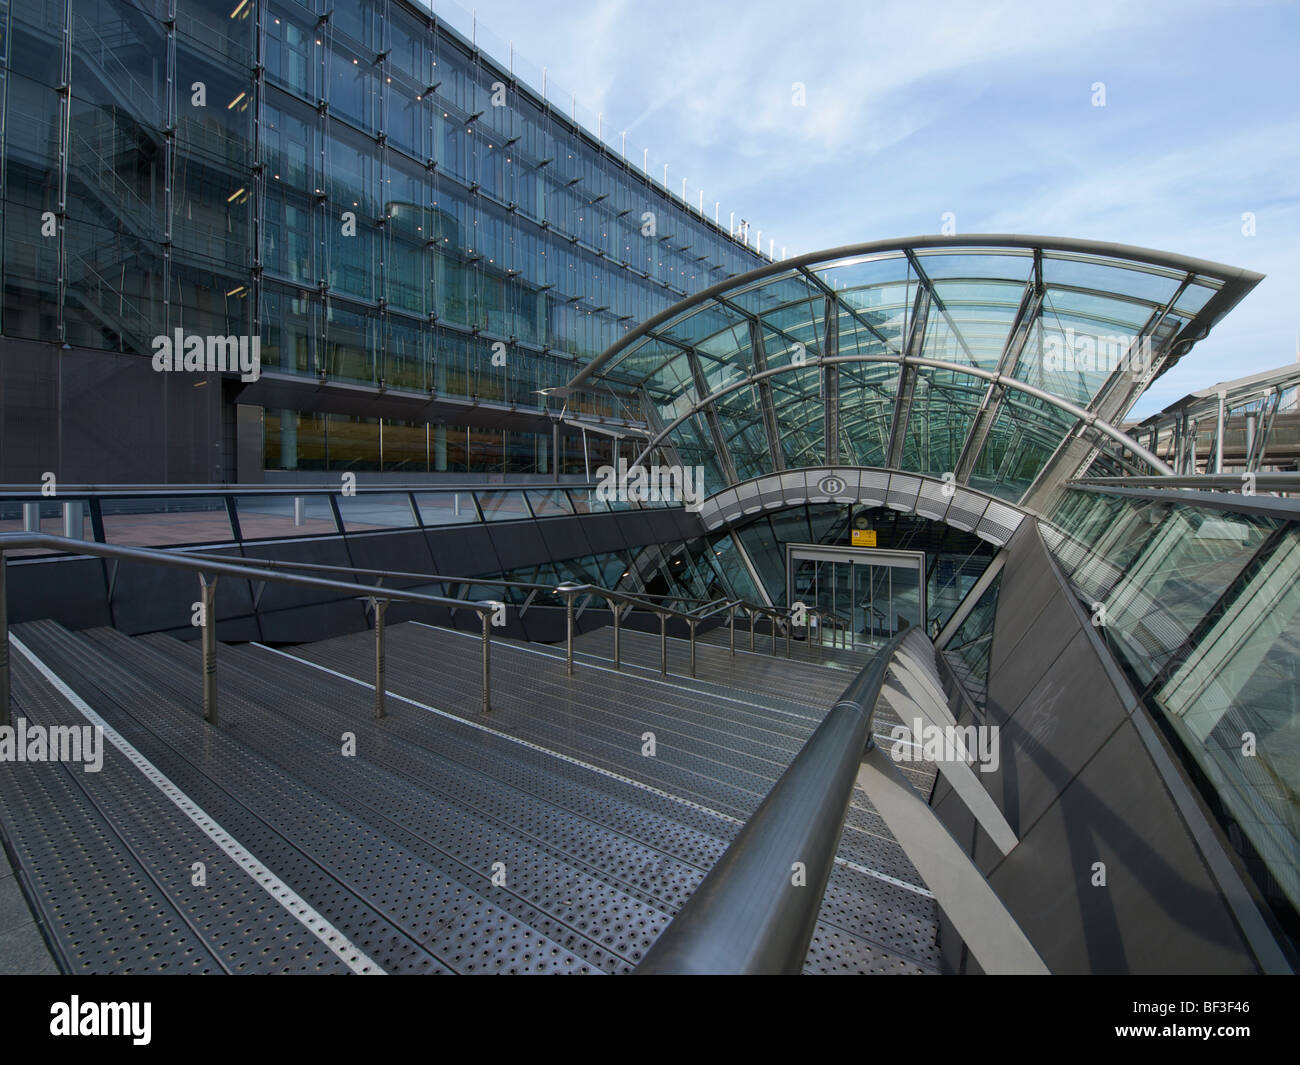 the contemporary architecture of the Brussels Luxembourg underground train station uses mostly metal and glass. Stock Photo